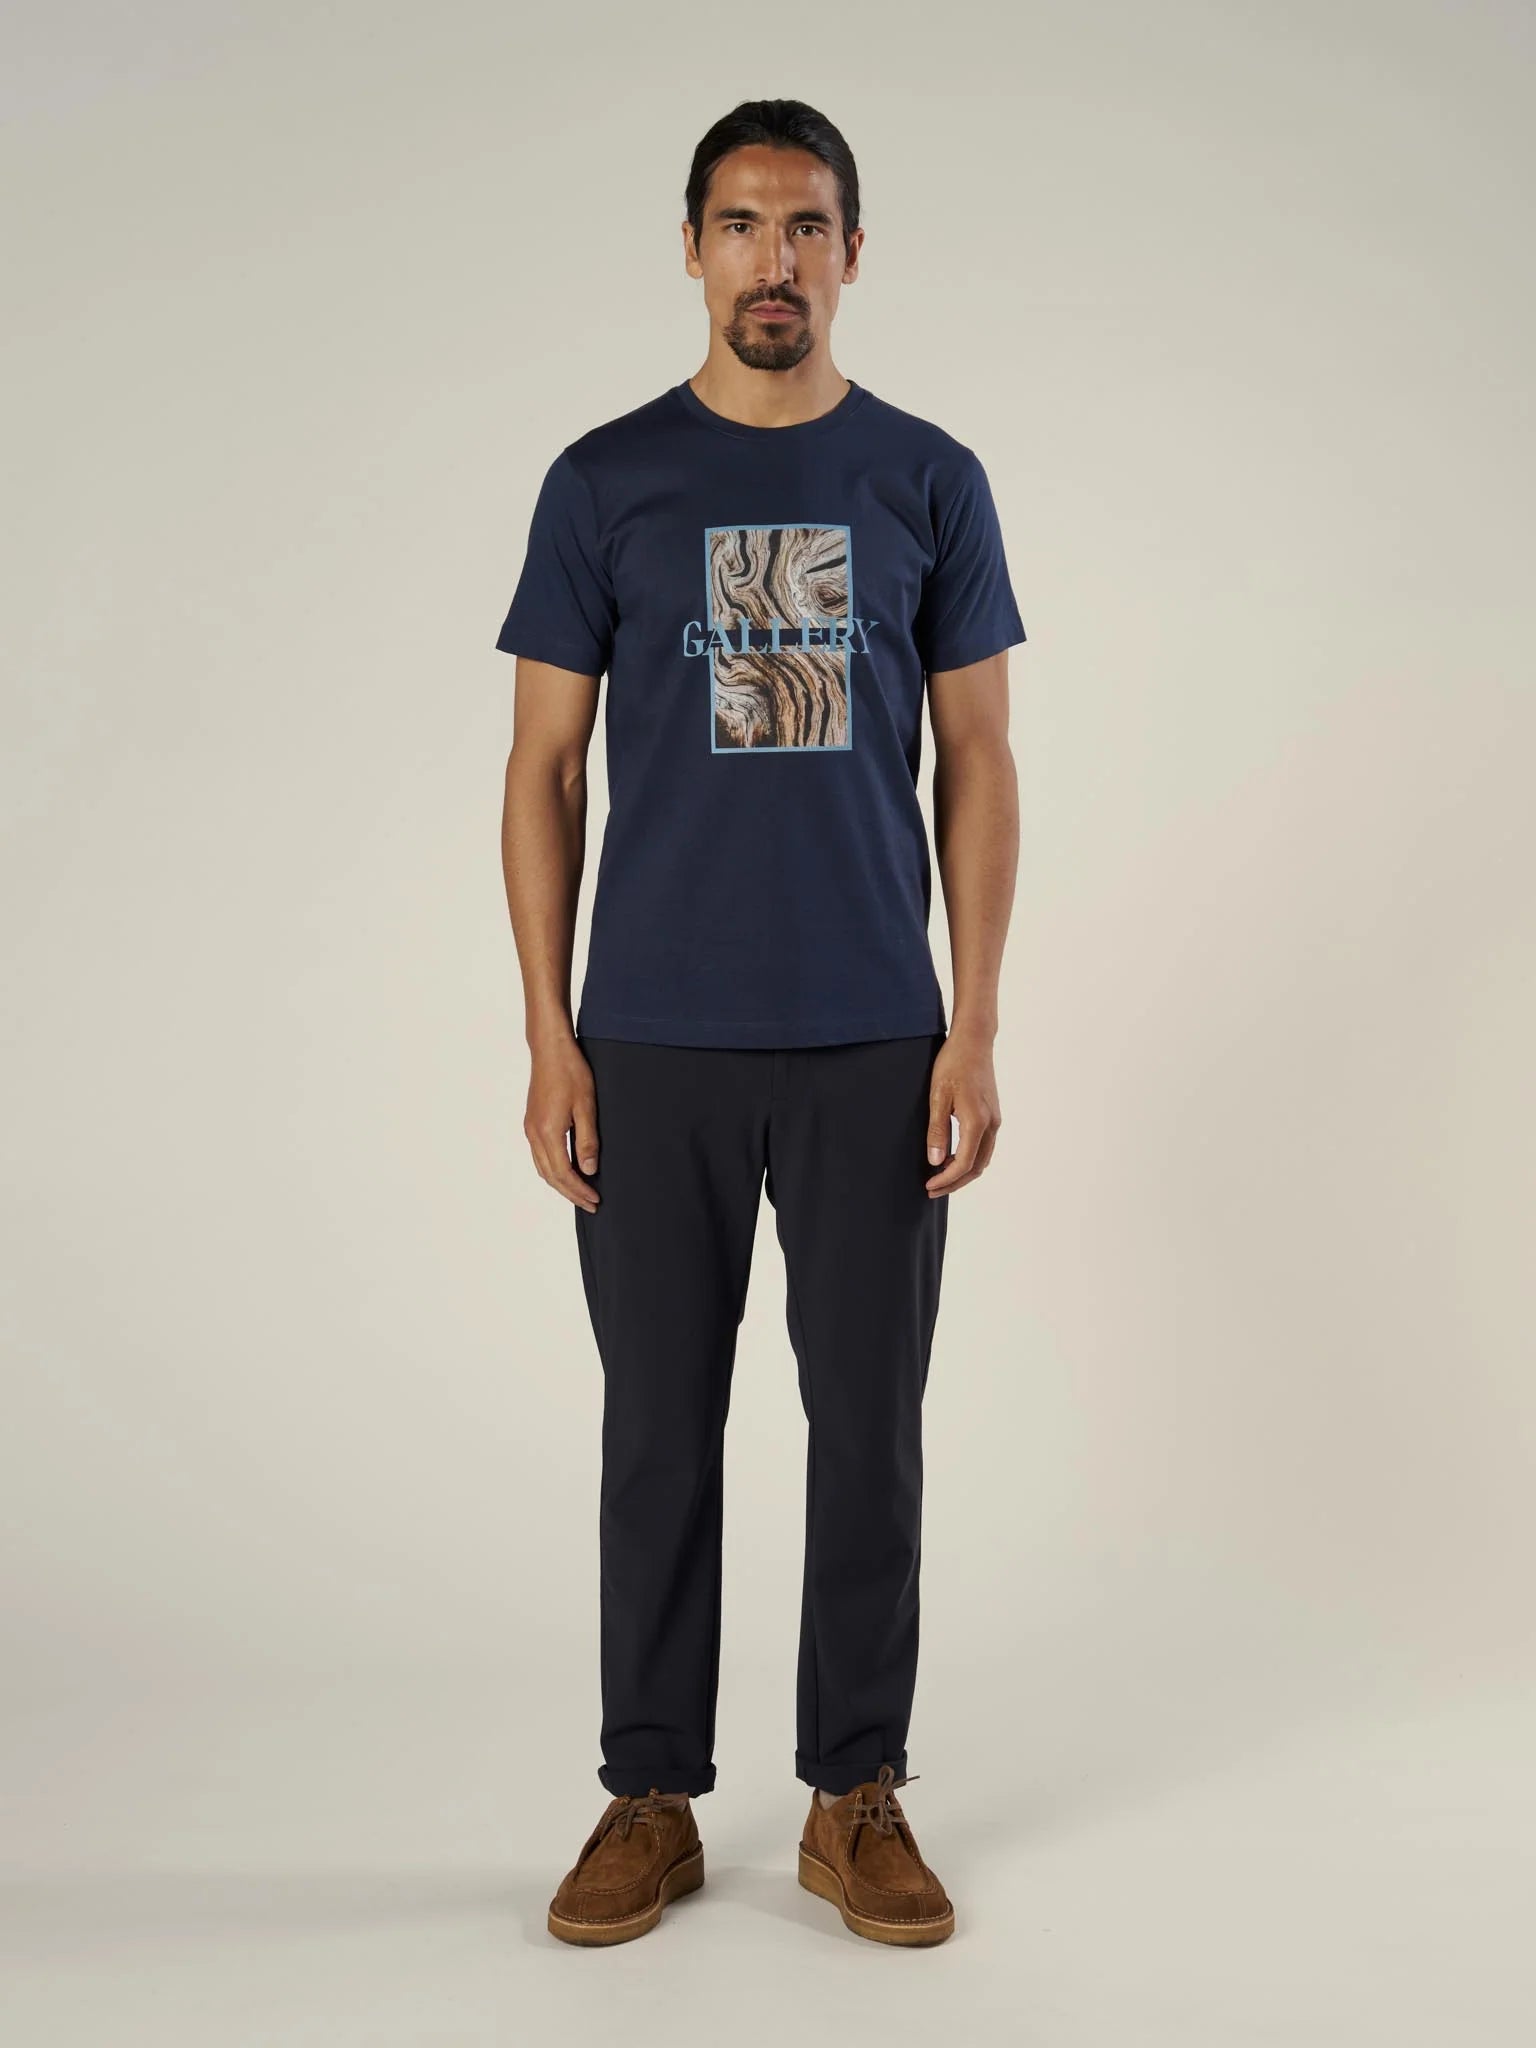 Vesly Ss Tee - Indigo Blue - The Sons online